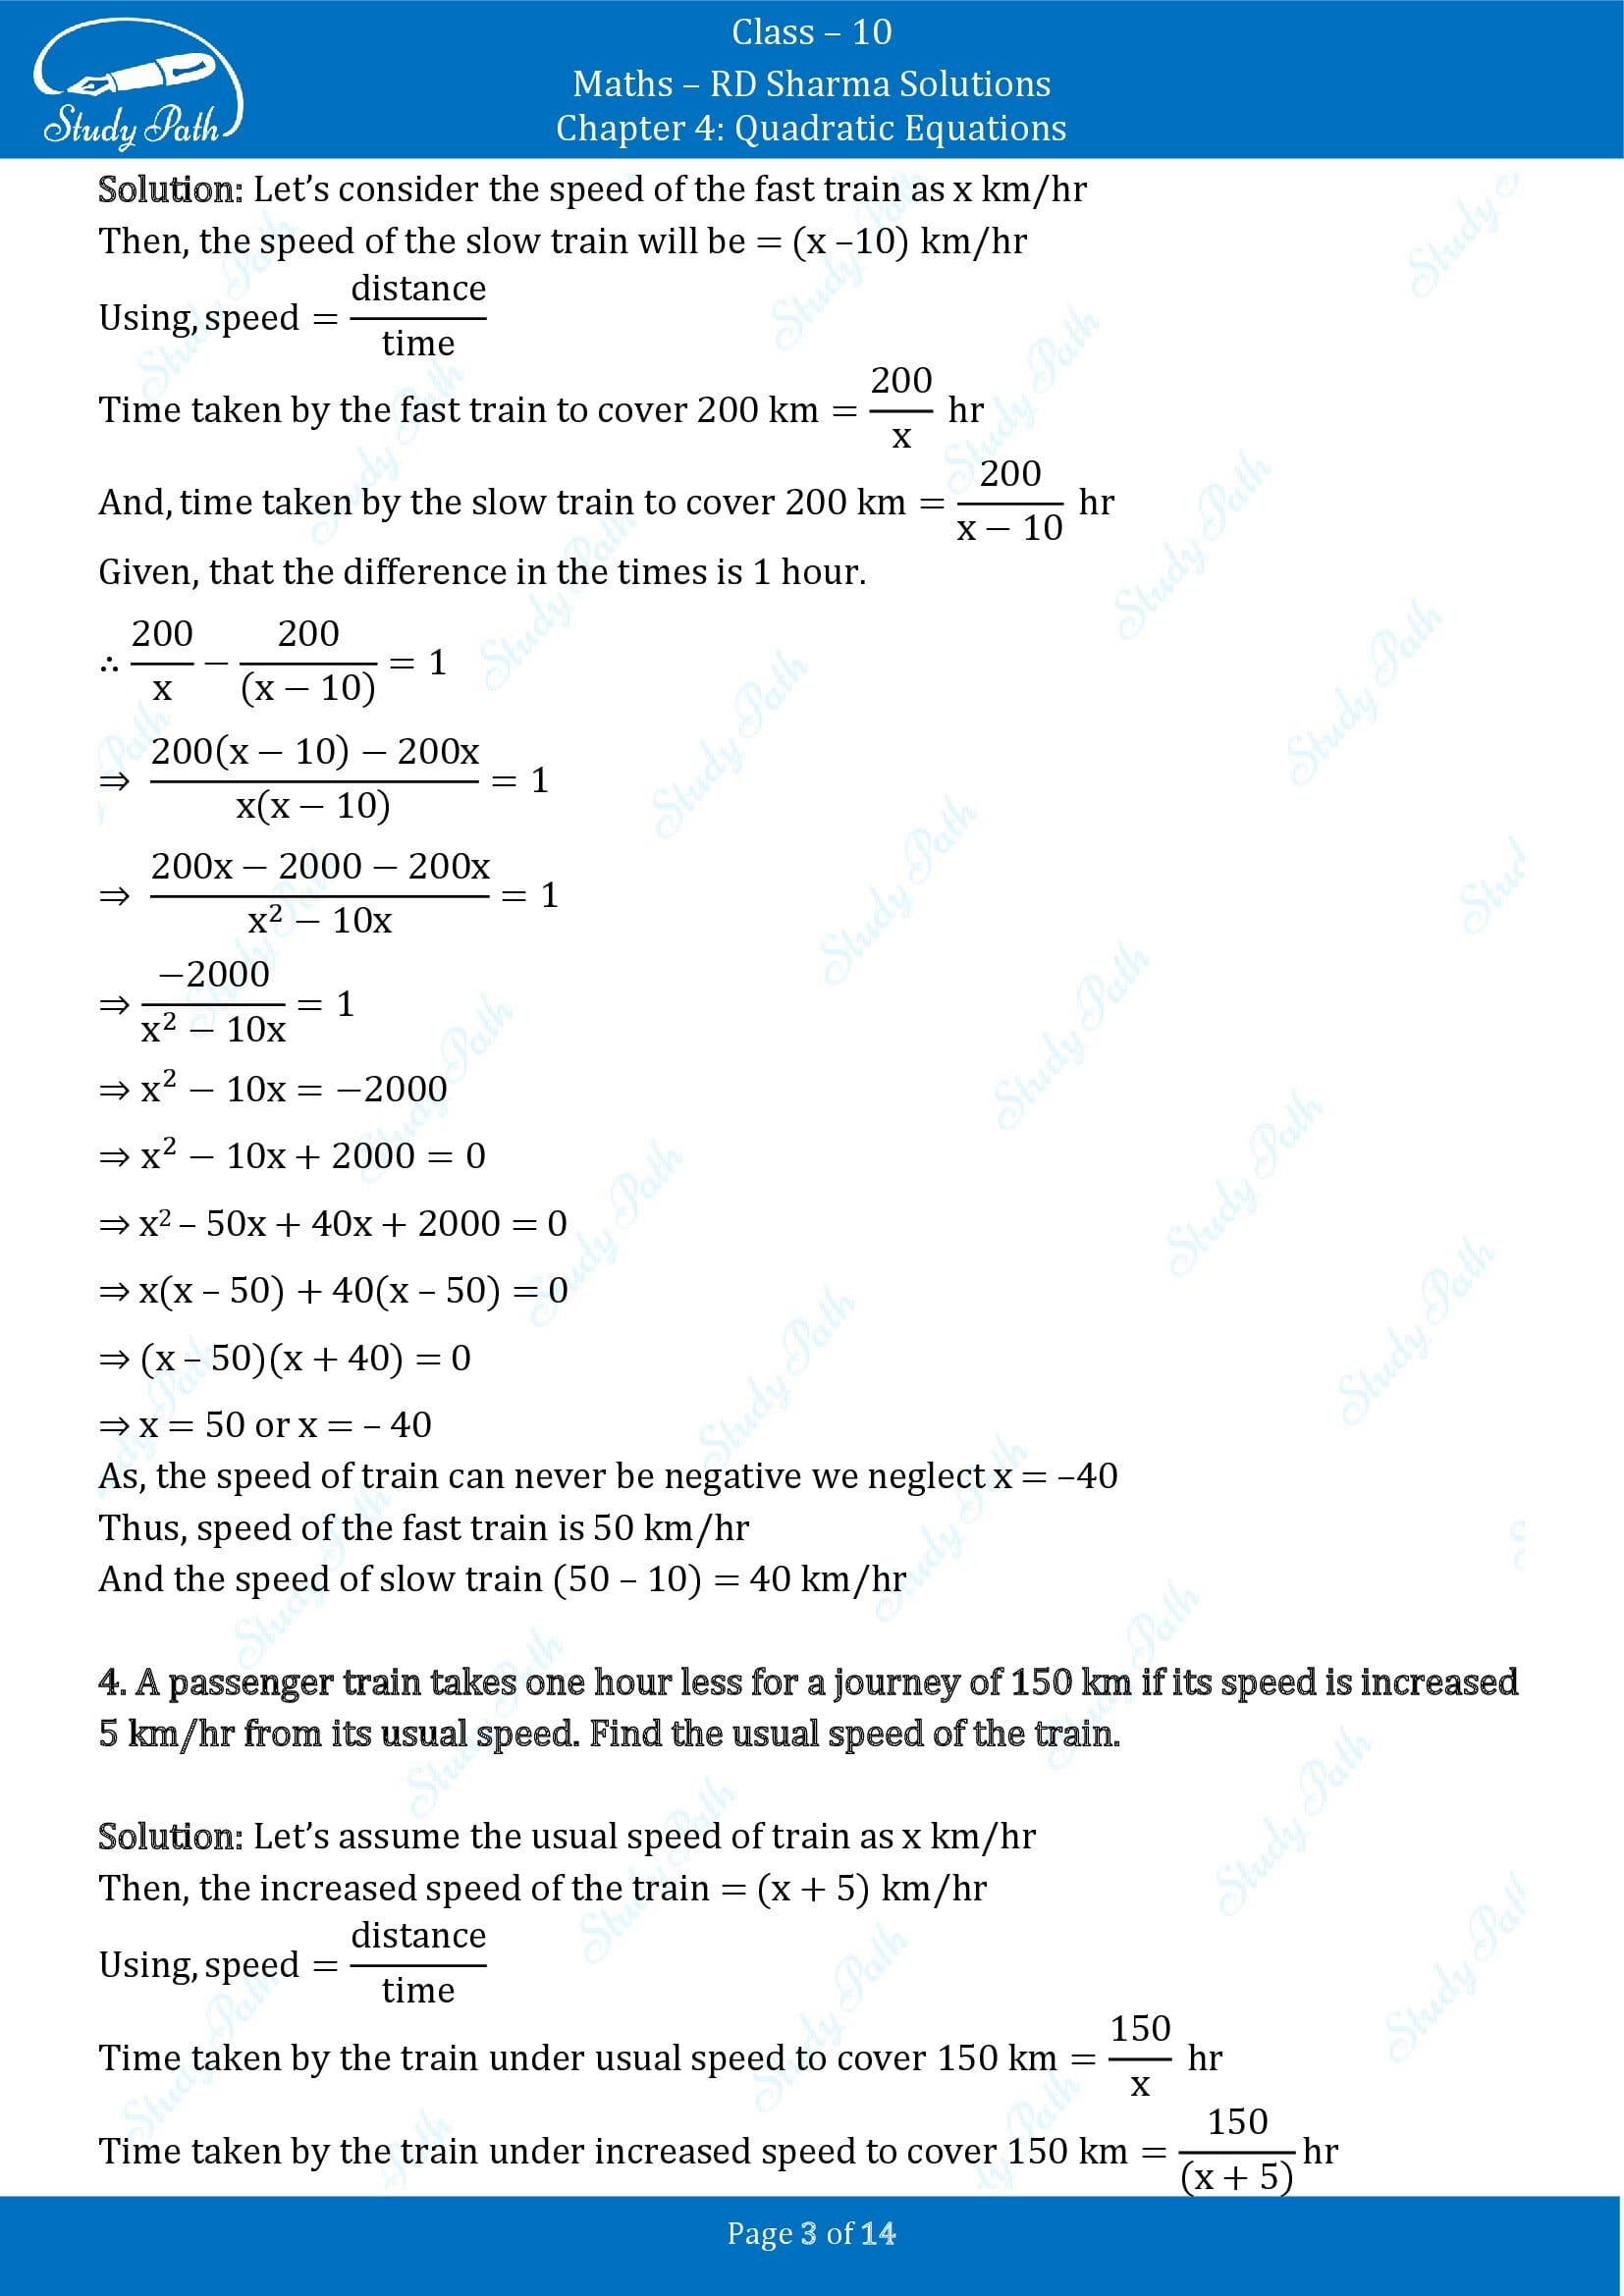 RD Sharma Solutions Class 10 Chapter 4 Quadratic Equations Exercise 4.8 00003